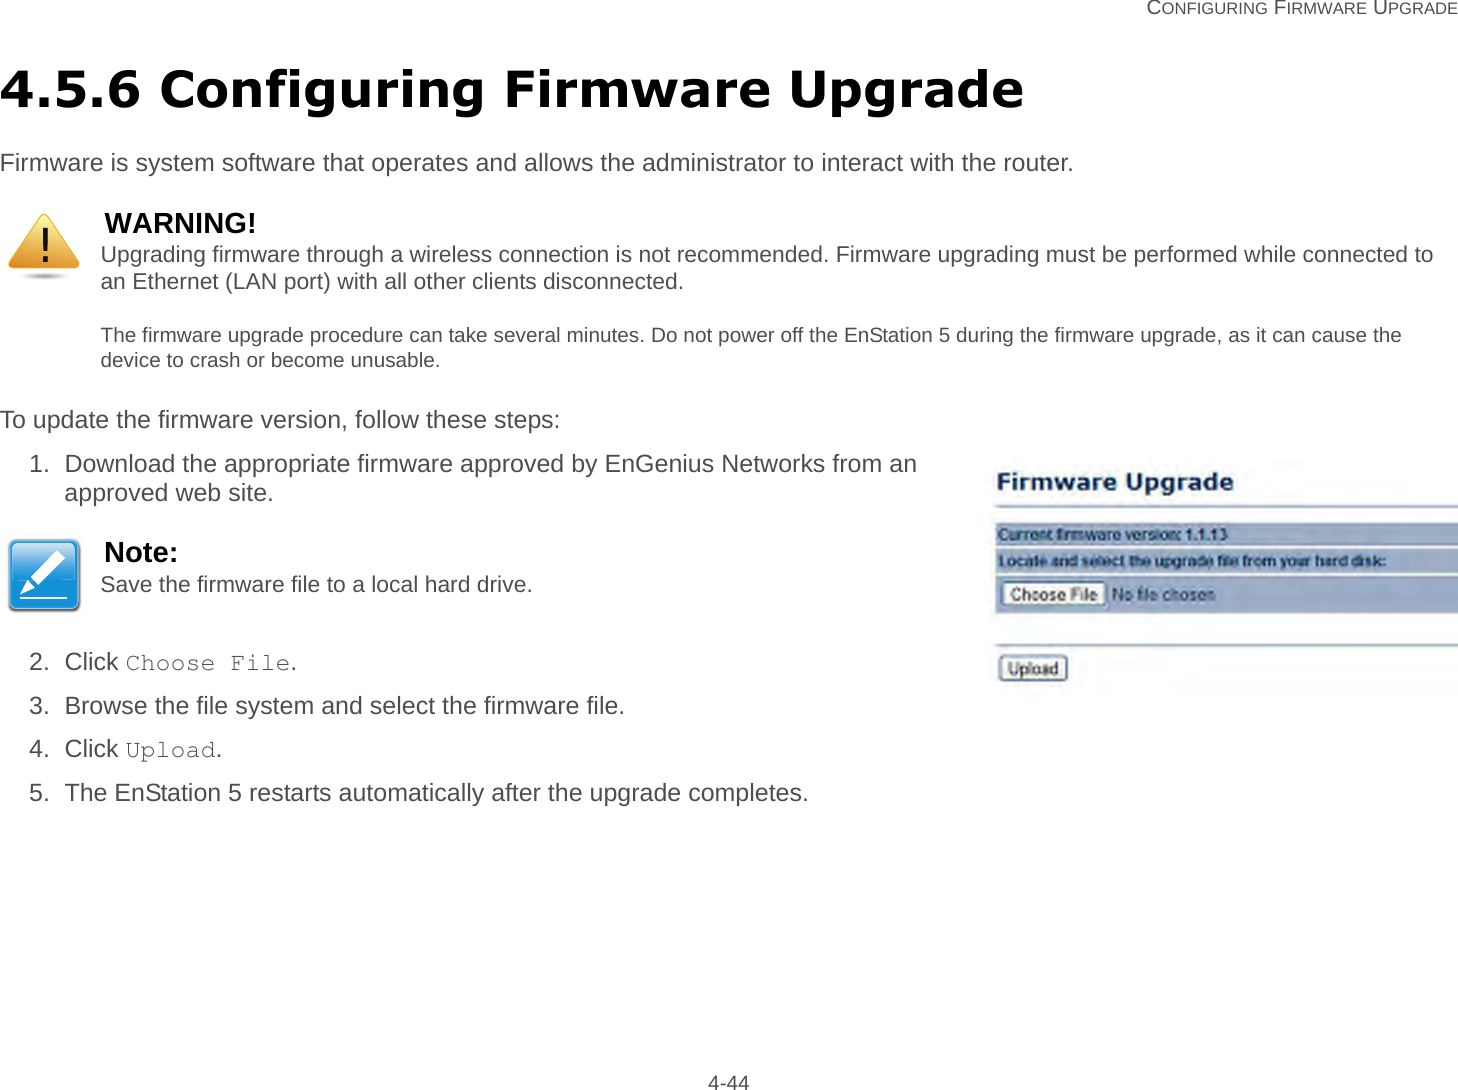   CONFIGURING FIRMWARE UPGRADE 4-444.5.6 Configuring Firmware UpgradeFirmware is system software that operates and allows the administrator to interact with the router.To update the firmware version, follow these steps:1. Download the appropriate firmware approved by EnGenius Networks from an approved web site.2. Click Choose File.3. Browse the file system and select the firmware file.4. Click Upload.5. The EnStation 5 restarts automatically after the upgrade completes.WARNING!Upgrading firmware through a wireless connection is not recommended. Firmware upgrading must be performed while connected to an Ethernet (LAN port) with all other clients disconnected.The firmware upgrade procedure can take several minutes. Do not power off the EnStation 5 during the firmware upgrade, as it can cause the device to crash or become unusable.Note:Save the firmware file to a local hard drive.!